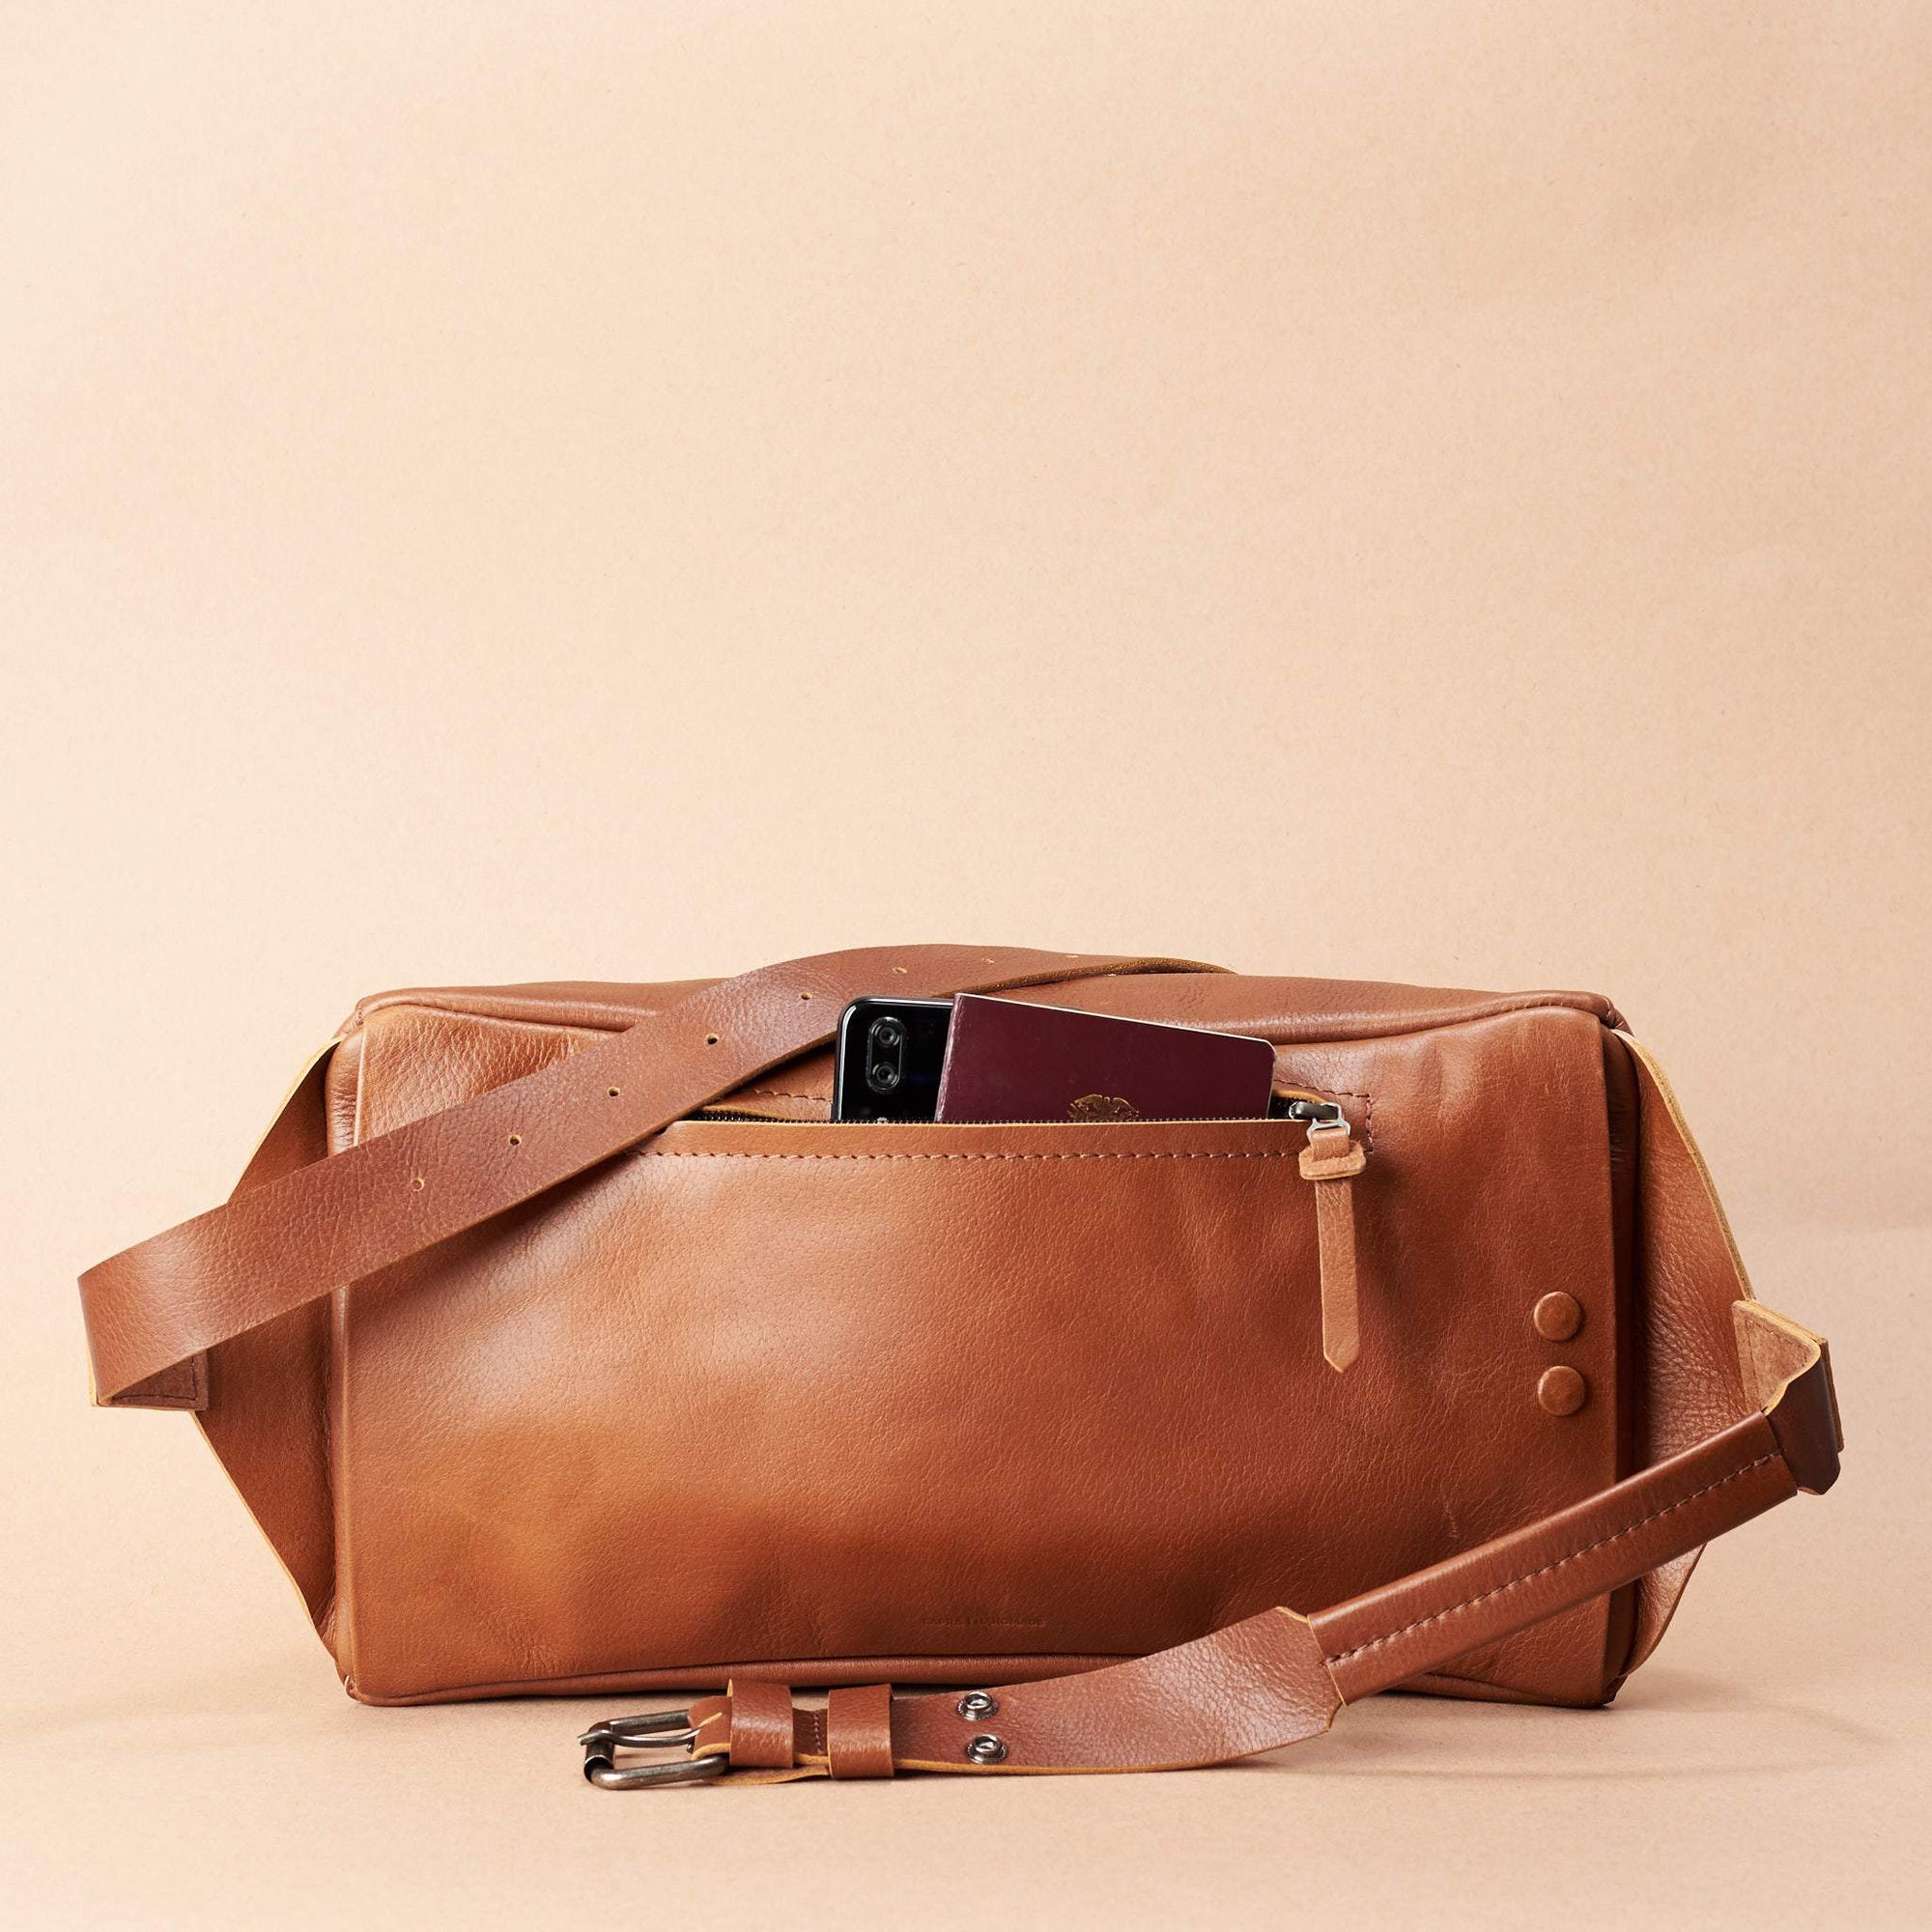 Tan Fenek sling bag backpack made by Capra Leather. Styling back pocket of small  leather crossbody for easy access.